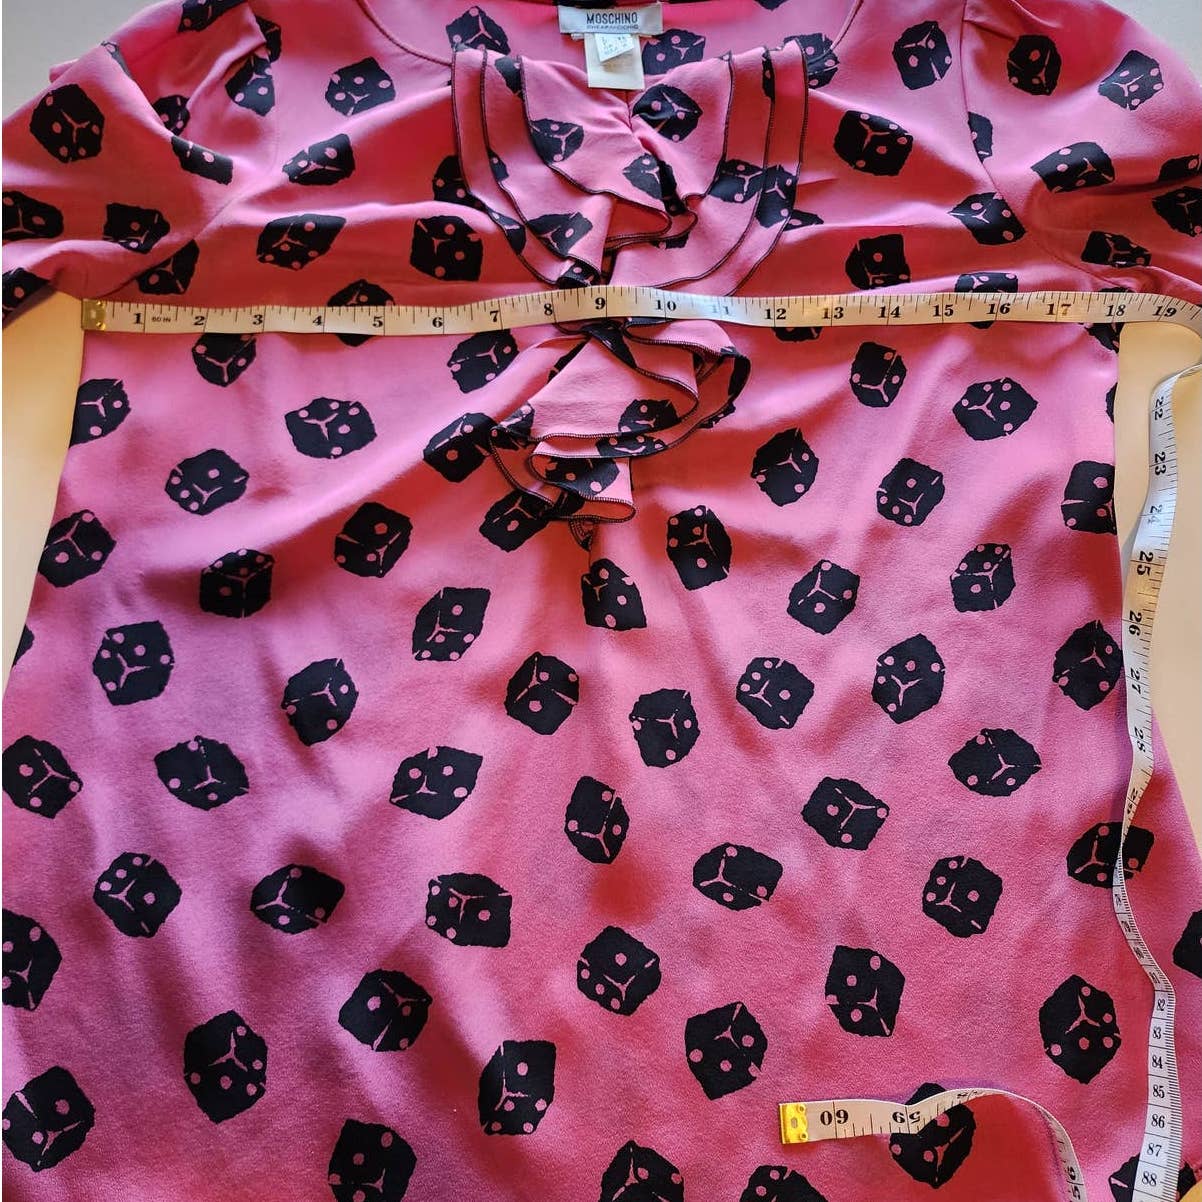 Moschino Cheap & Chic Pink Silk Blouse with Dice Print